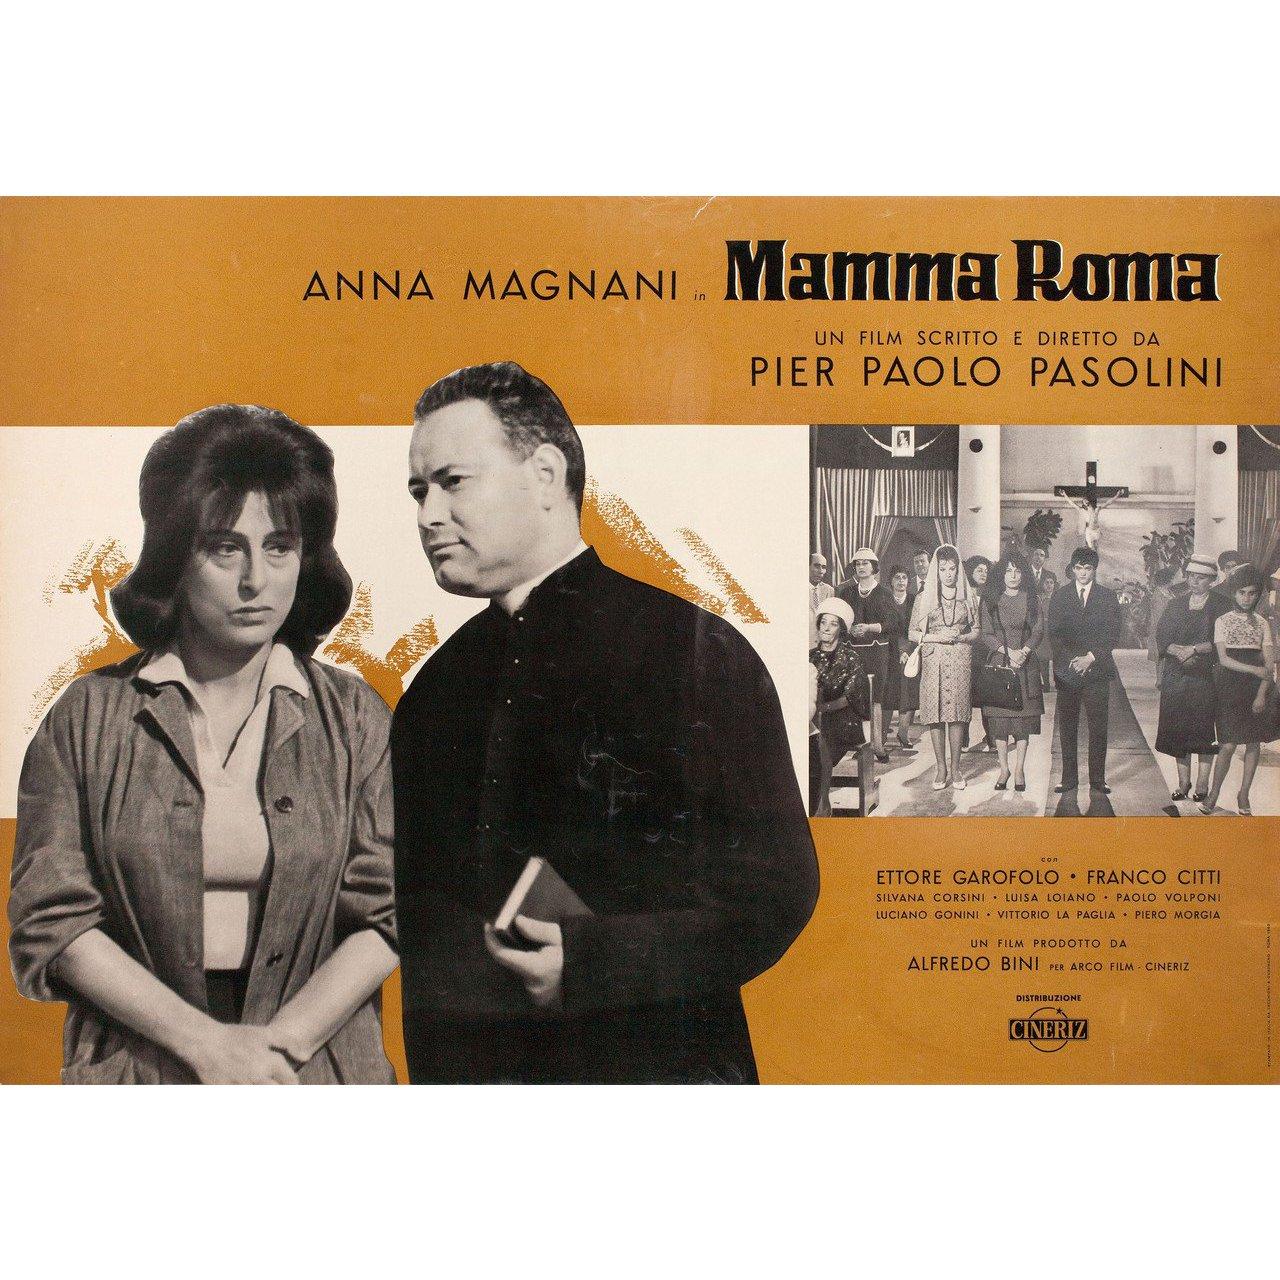 Original 1962 Italian fotobusta poster for the film Mamma Roma directed by Pier Paolo Pasolini with Anna Magnani / Ettore Garofolo / Franco Citti / Silvana Corsini. Very good-fine condition, rolled. Please note: the size is stated in inches and the